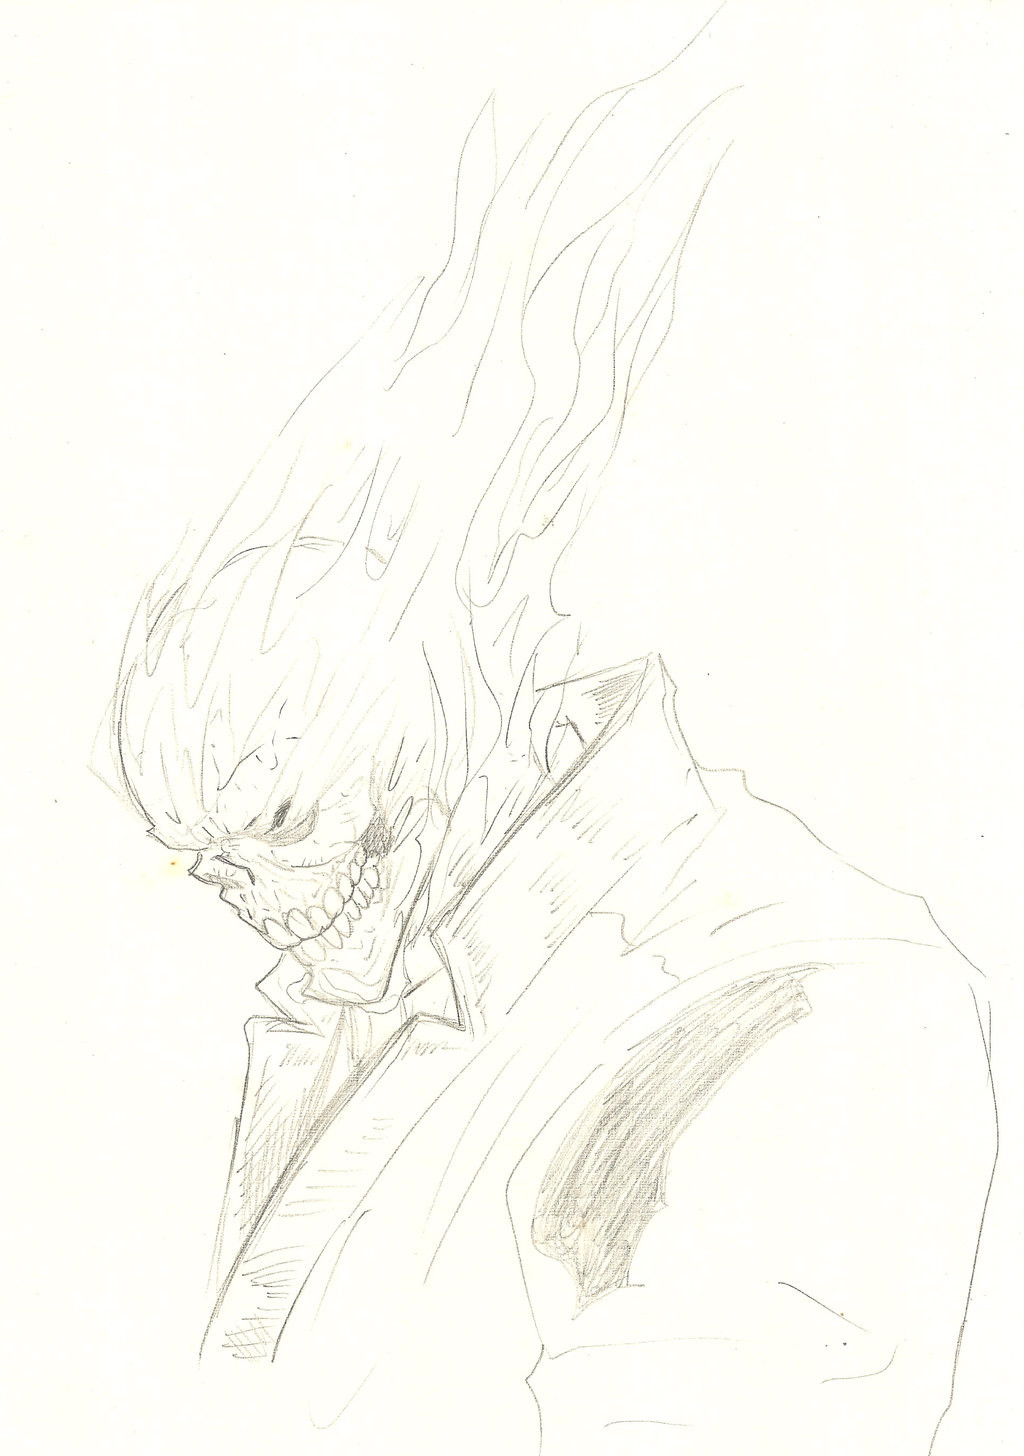 prompthunt: Very detailed pencil drawing of Marvel ghost rider